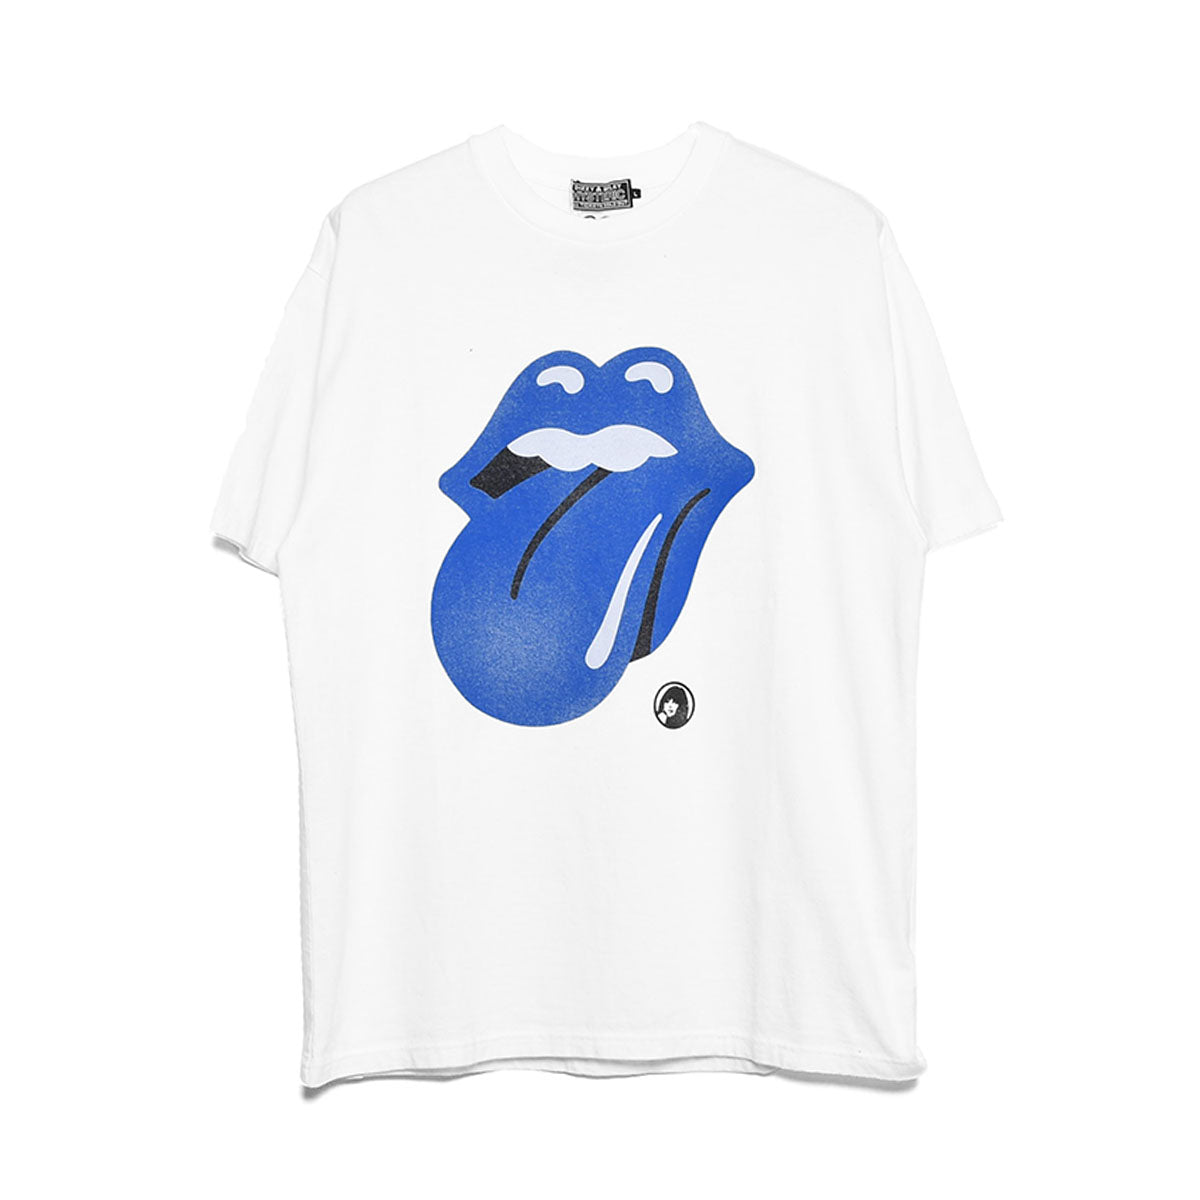 HYSTERIC GLAMOUR THE ROLLING STONES TシャツブラックLサイズ